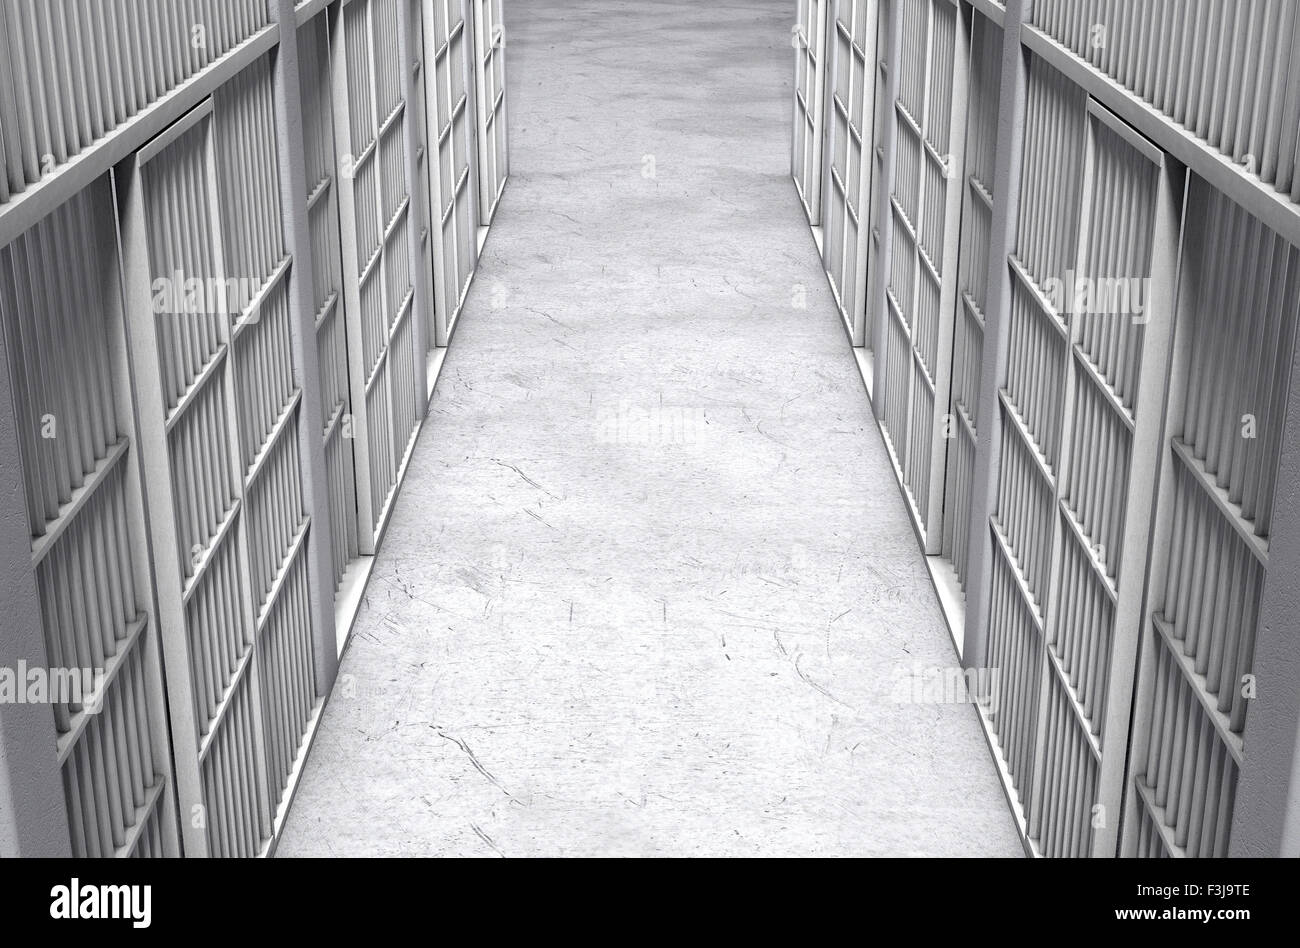 A direct top view of a row of closed jail cells between a concrete aisle lit by a single dramatic spotlight Stock Photo